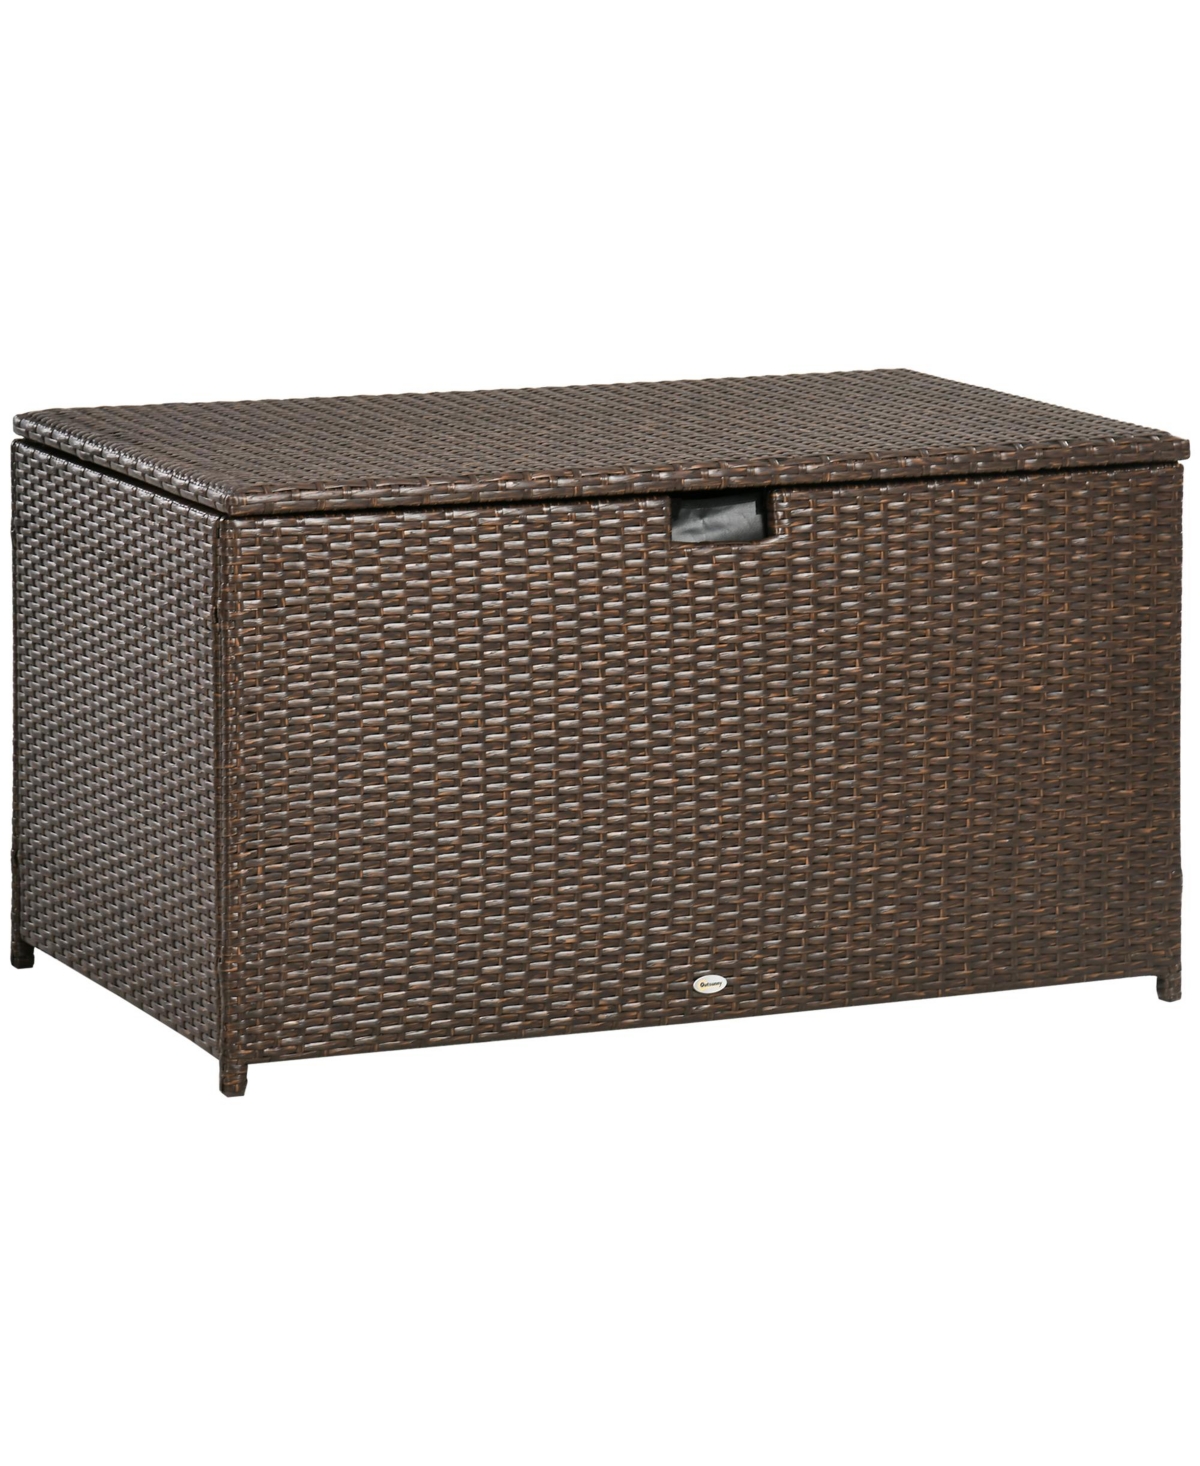 Outdoor Deck Box, Pe Rattan Wicker with Liner, Hydraulic Lift, and A Handle for Indoor, Outdoor, Patio Furniture Cushions, Pool, Toys, Garden